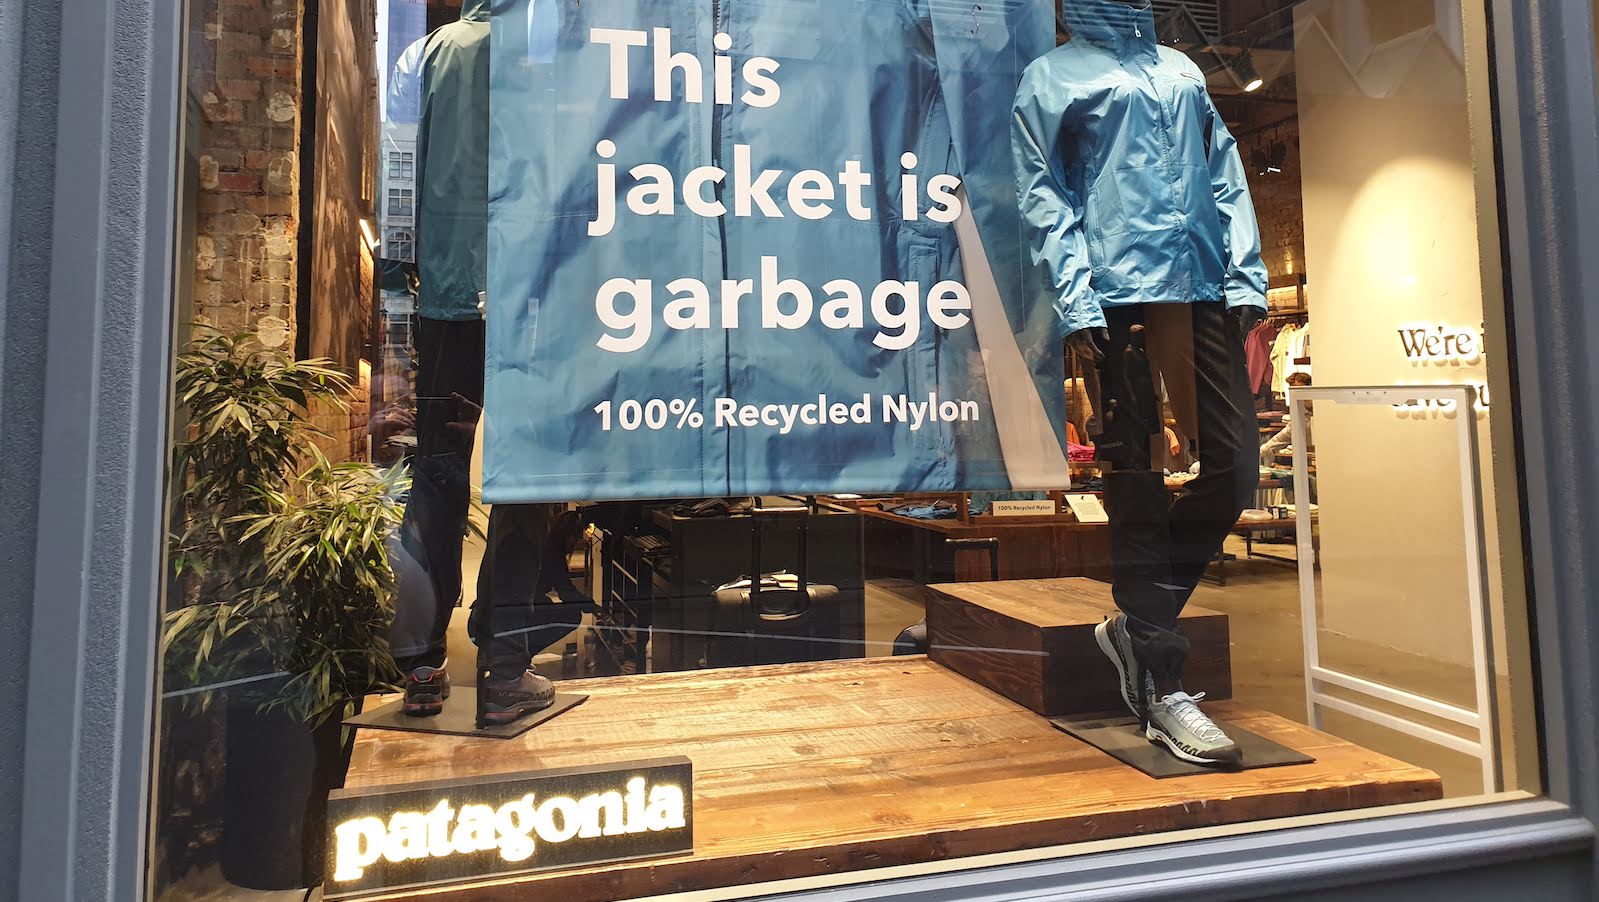 Picture of a Patagonia store-front with a message that reads 'This jacket is garbage'.